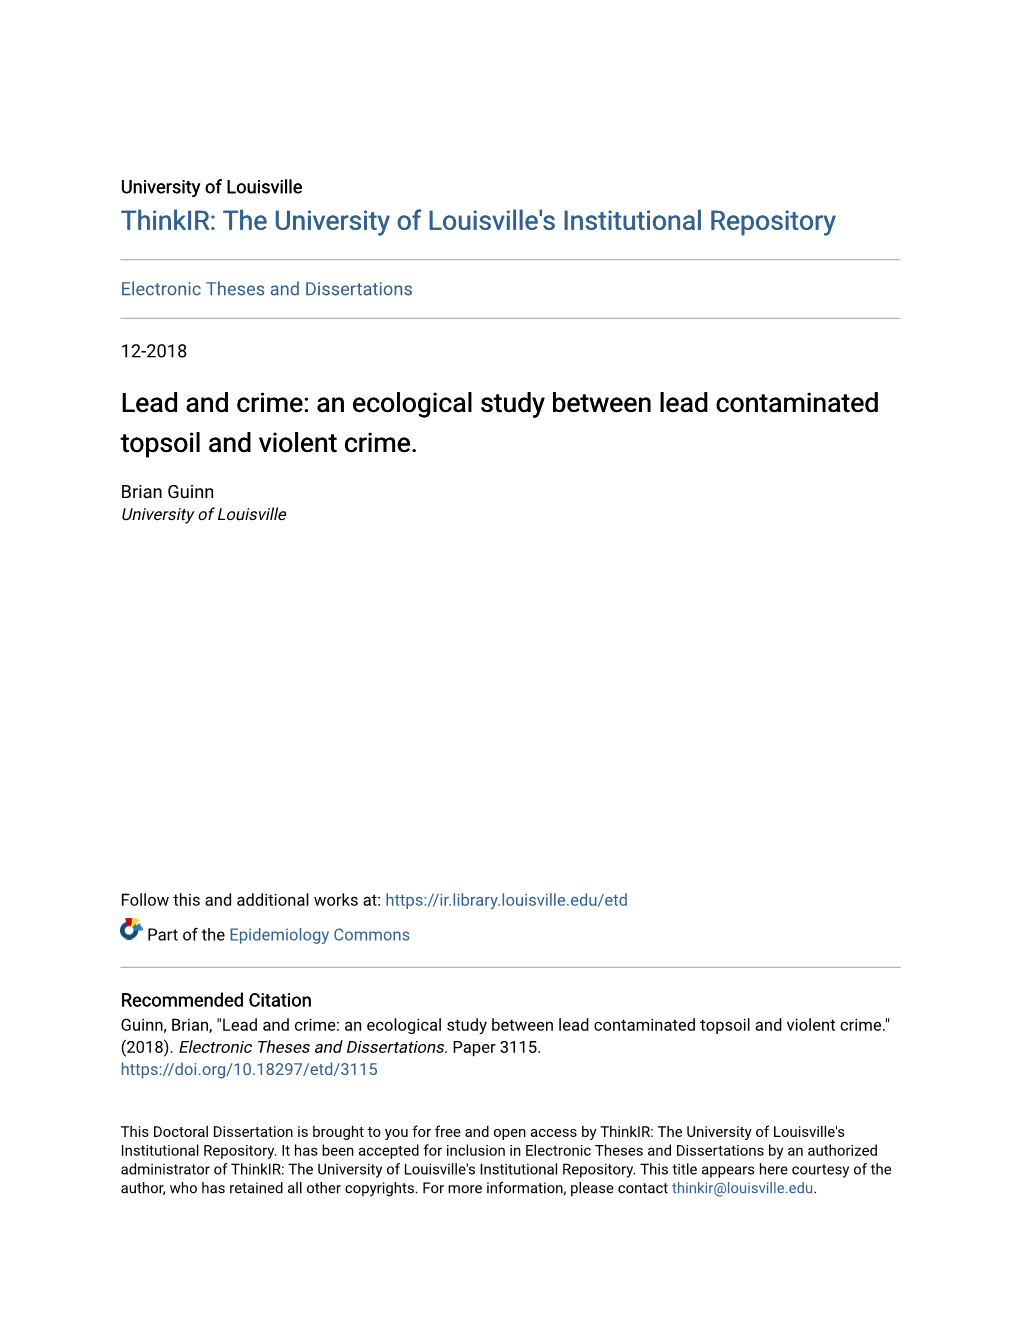 Lead and Crime: an Ecological Study Between Lead Contaminated Topsoil and Violent Crime